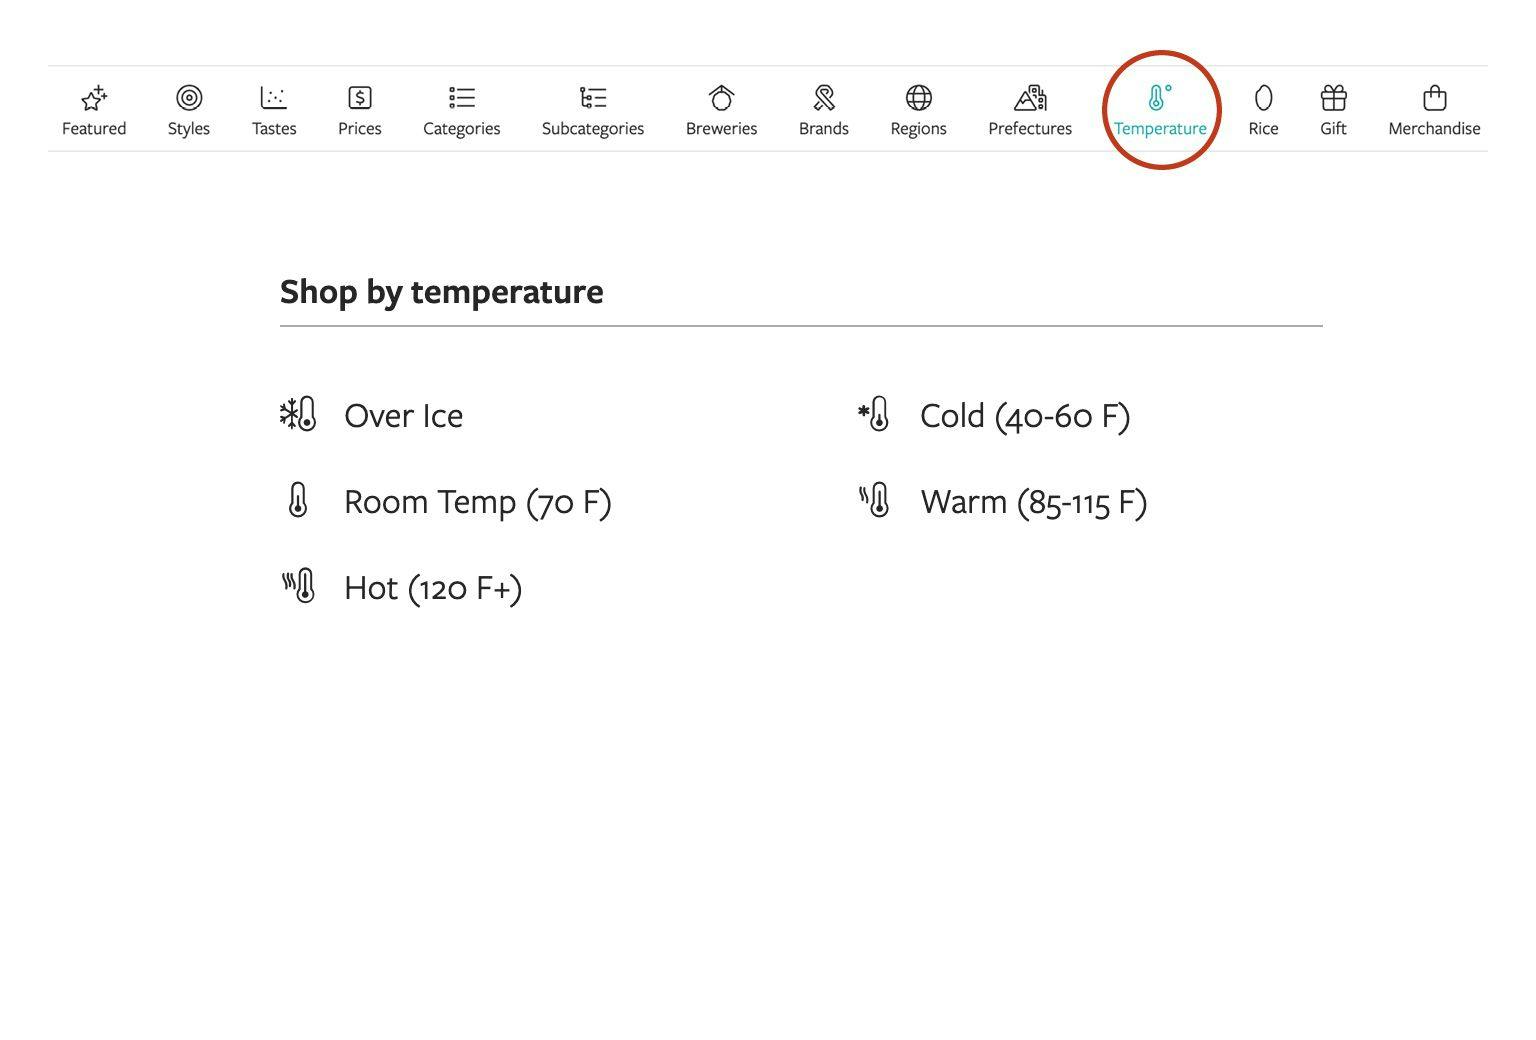 Sort by temperature